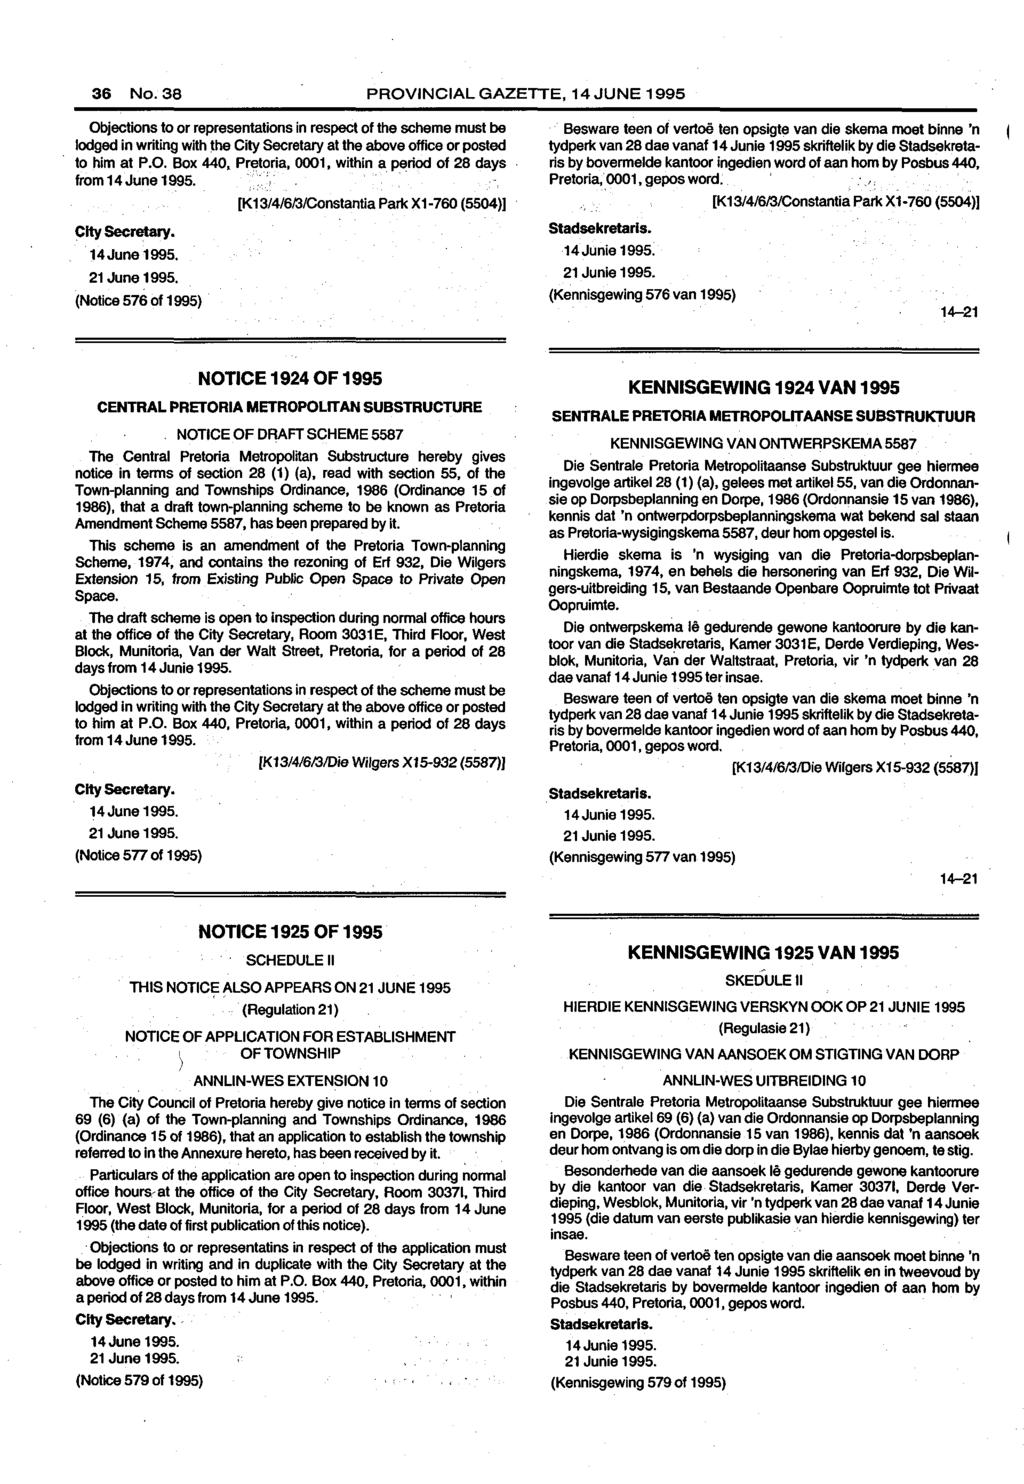 36 No. PROVINCIAL GAZETTE, 14 JUNE 1995 Objections to or representations in respect of the scheme must be lodged in writing with the City Secretary at the above office or posted to him at P.O. Box 440, Pr13toria, 0001, within a period of 28 days from 14June 1995.